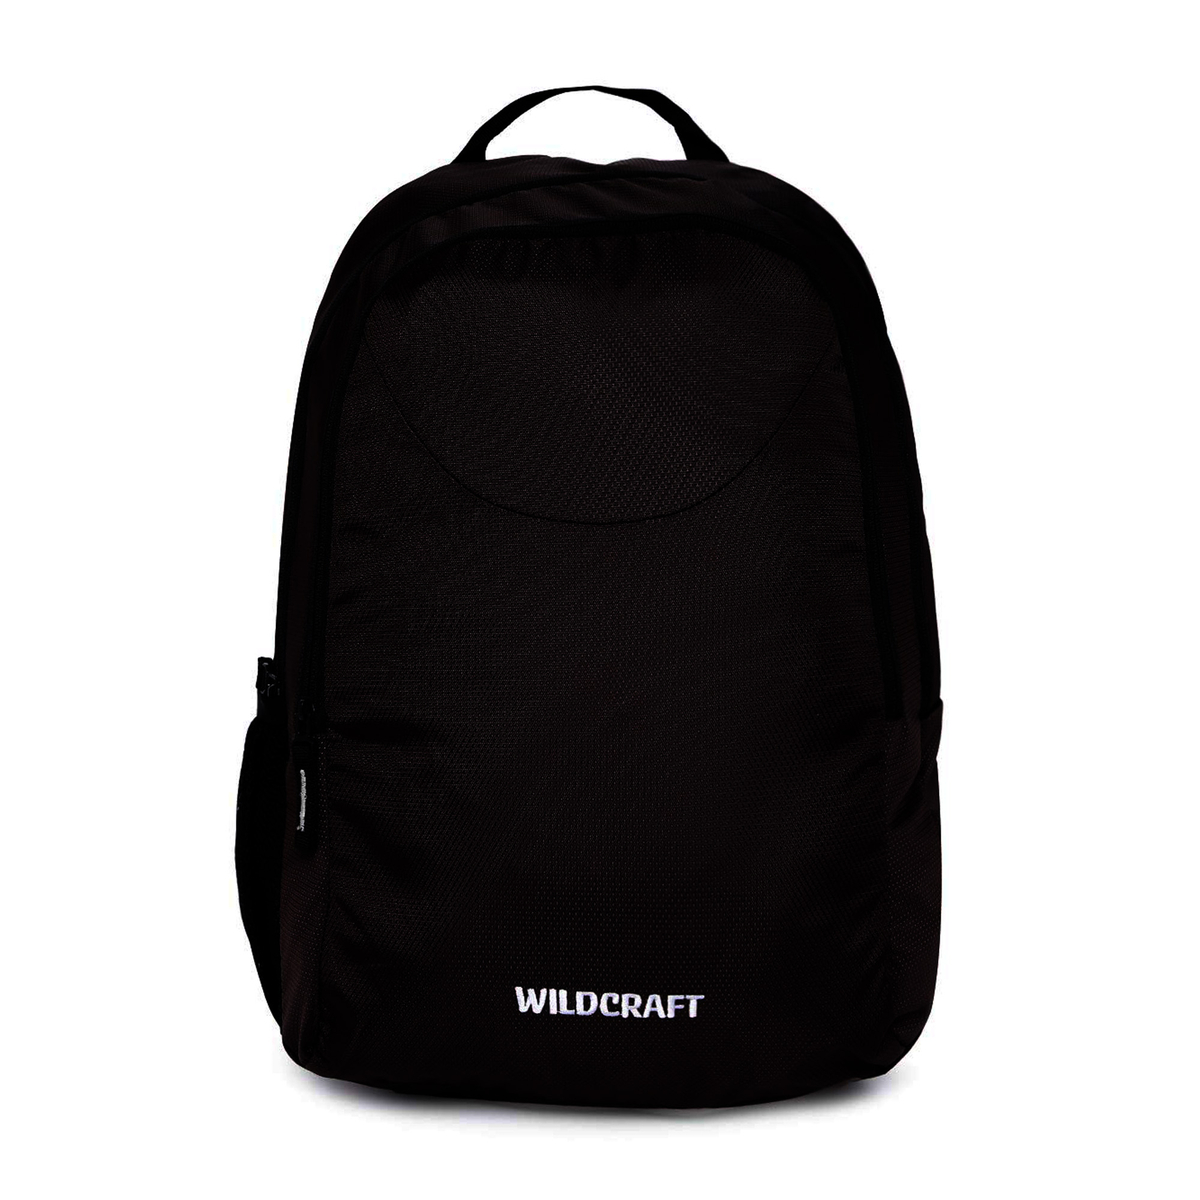 Wildcraft Boost1 Laptop Backpack, 18.5 Inches, Black